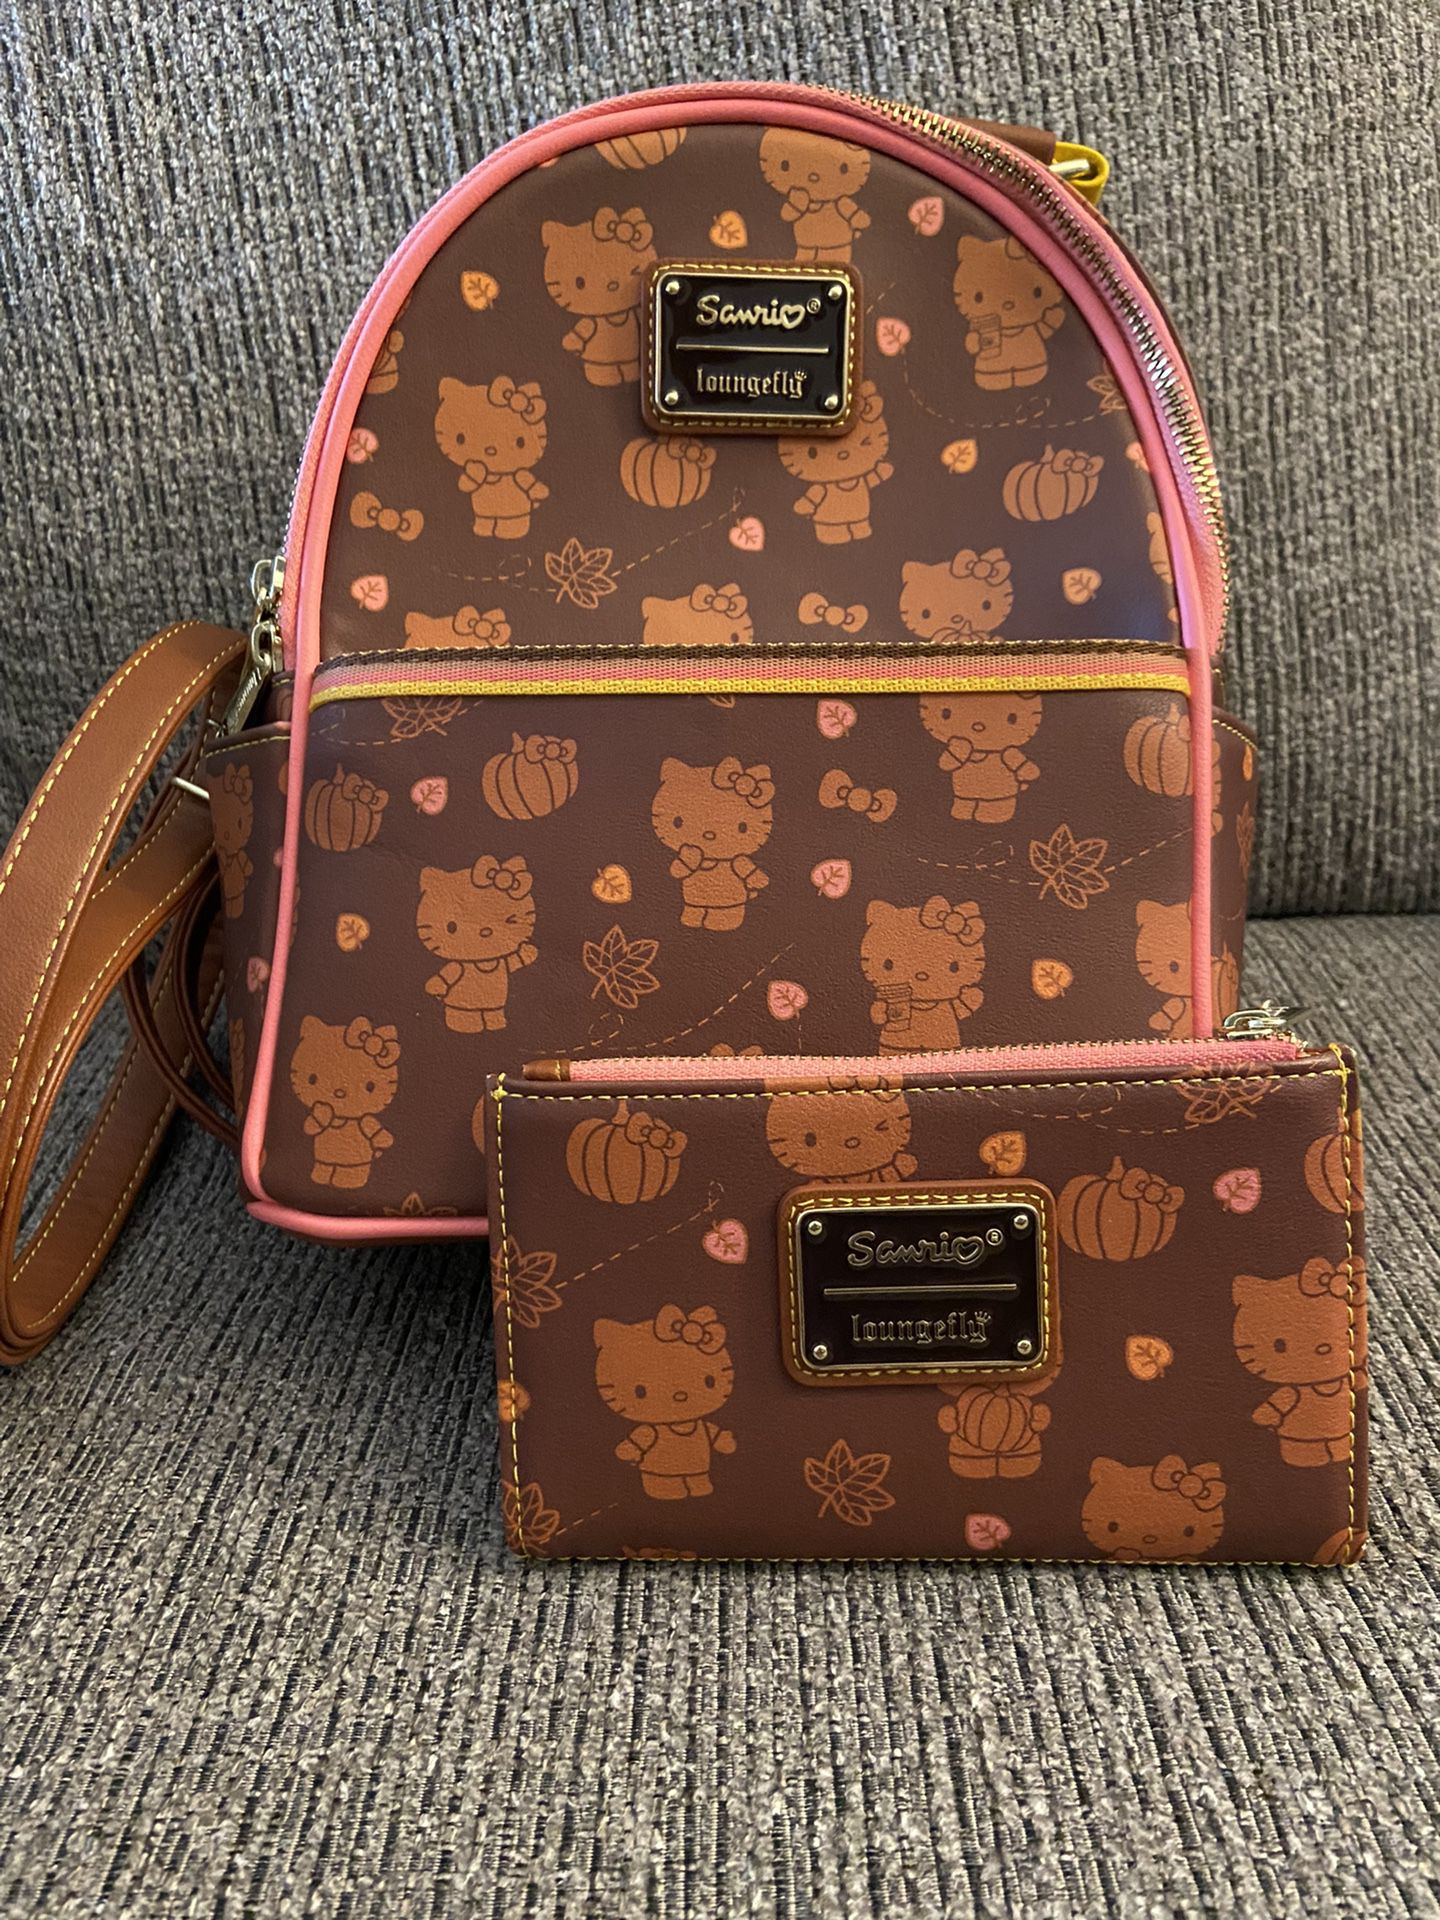 louis loungefly backpack